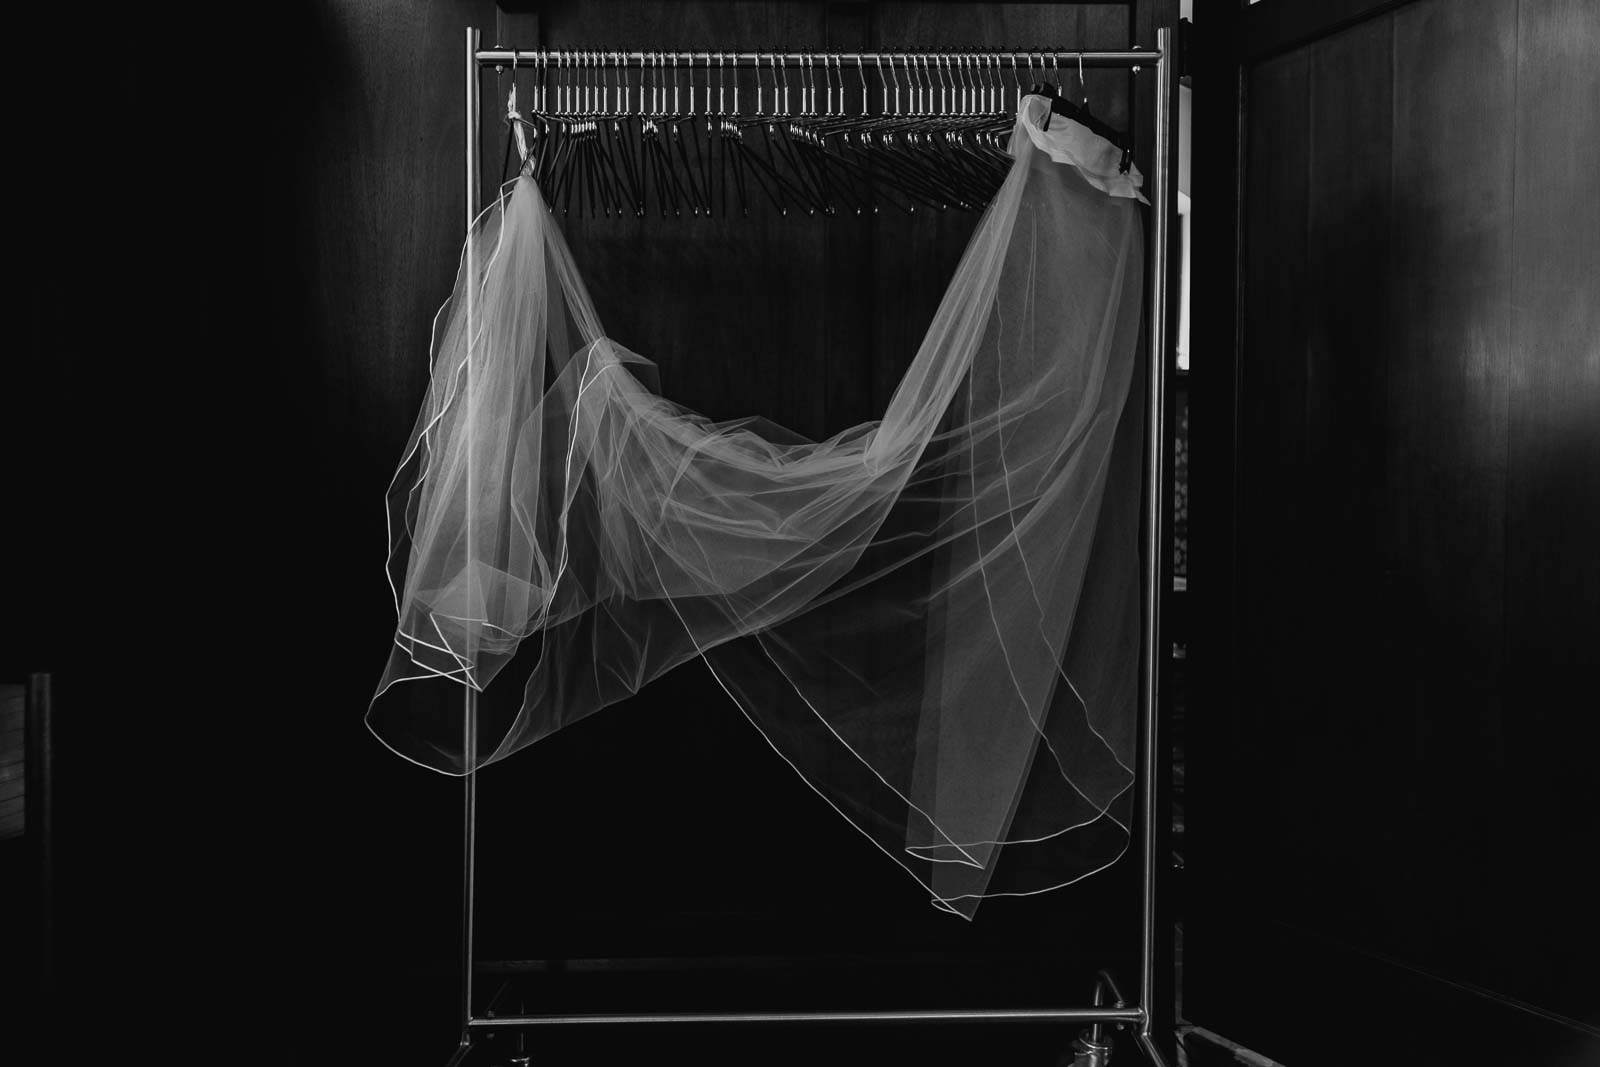 A beautiful veil hangs in a candid caption in a black-and-white image hanging poetically